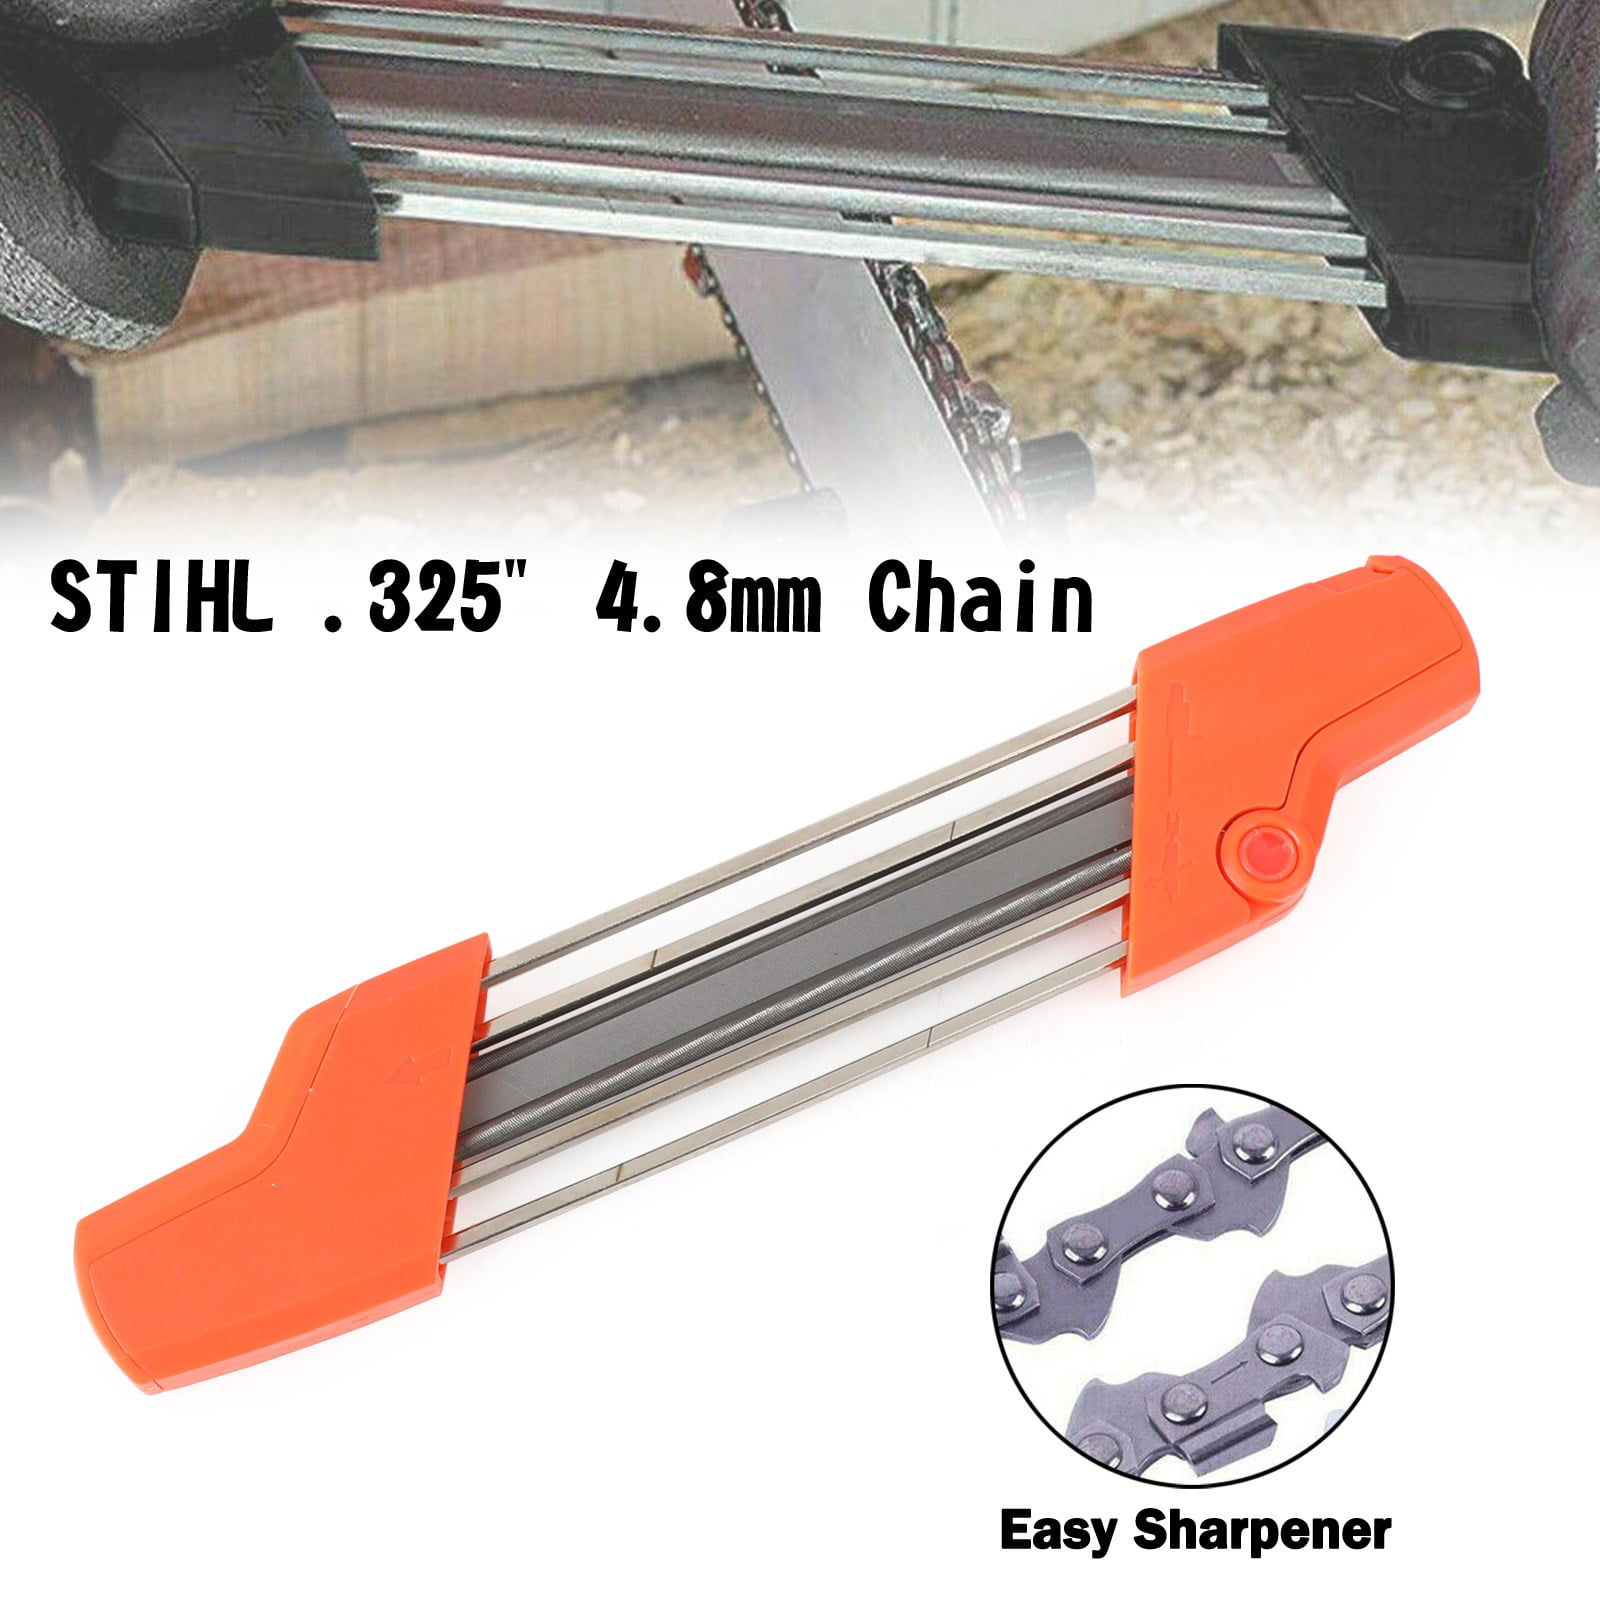 Details about  / Chain saw Teeth Sharpener Self Sharpening Saw Blade Bar-Mount Chain Woodworking